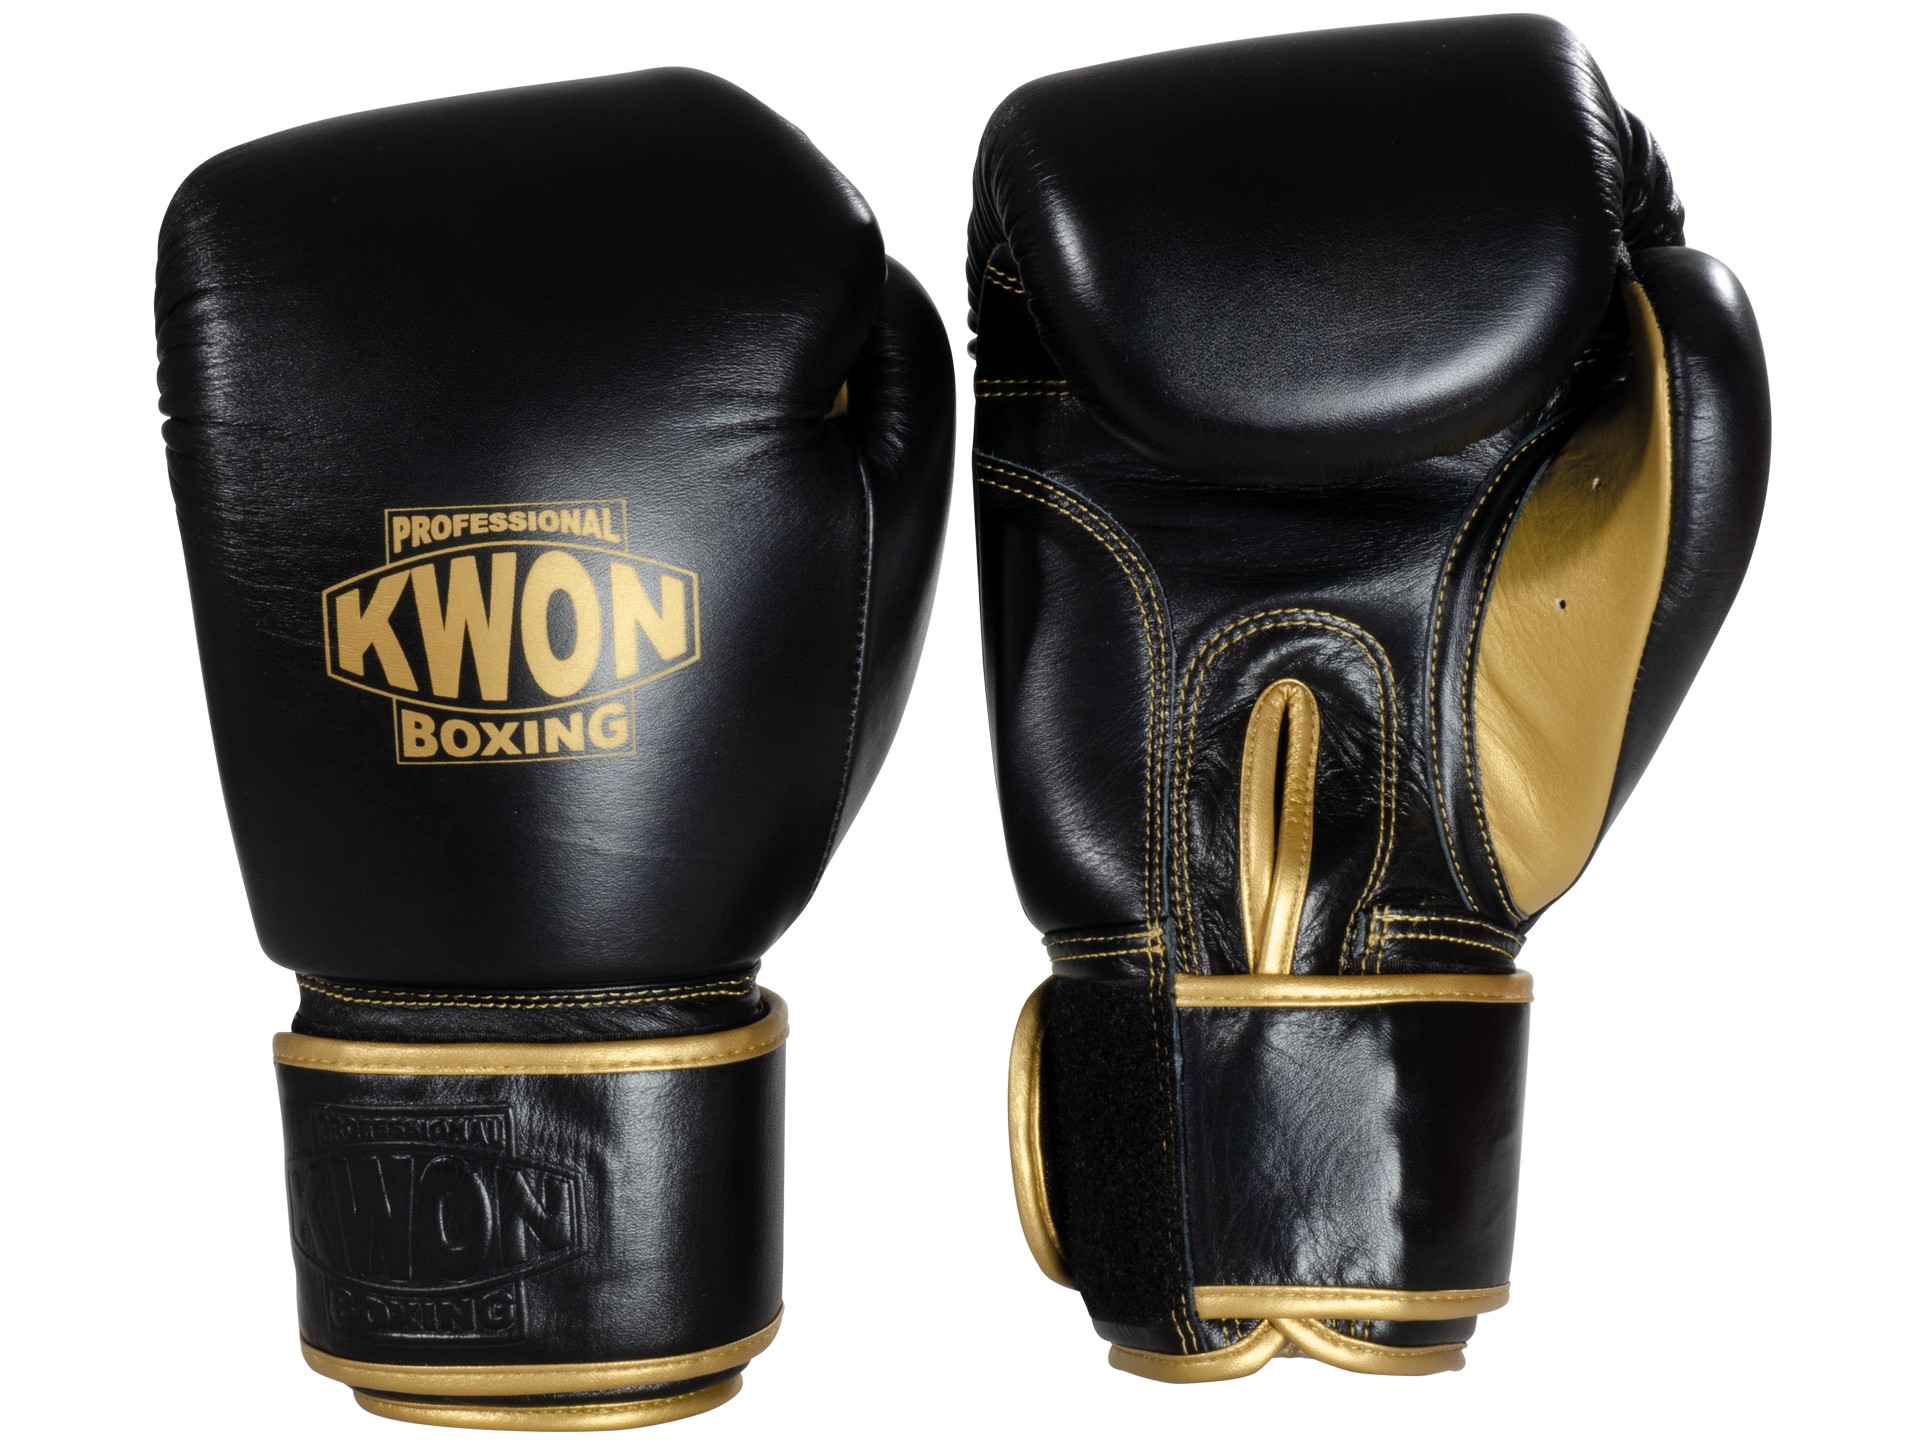 KWON PROFESSIONAL BOXING kickboxing Thai boxes Leather Defensive for | with Velcro Sparring Gloves